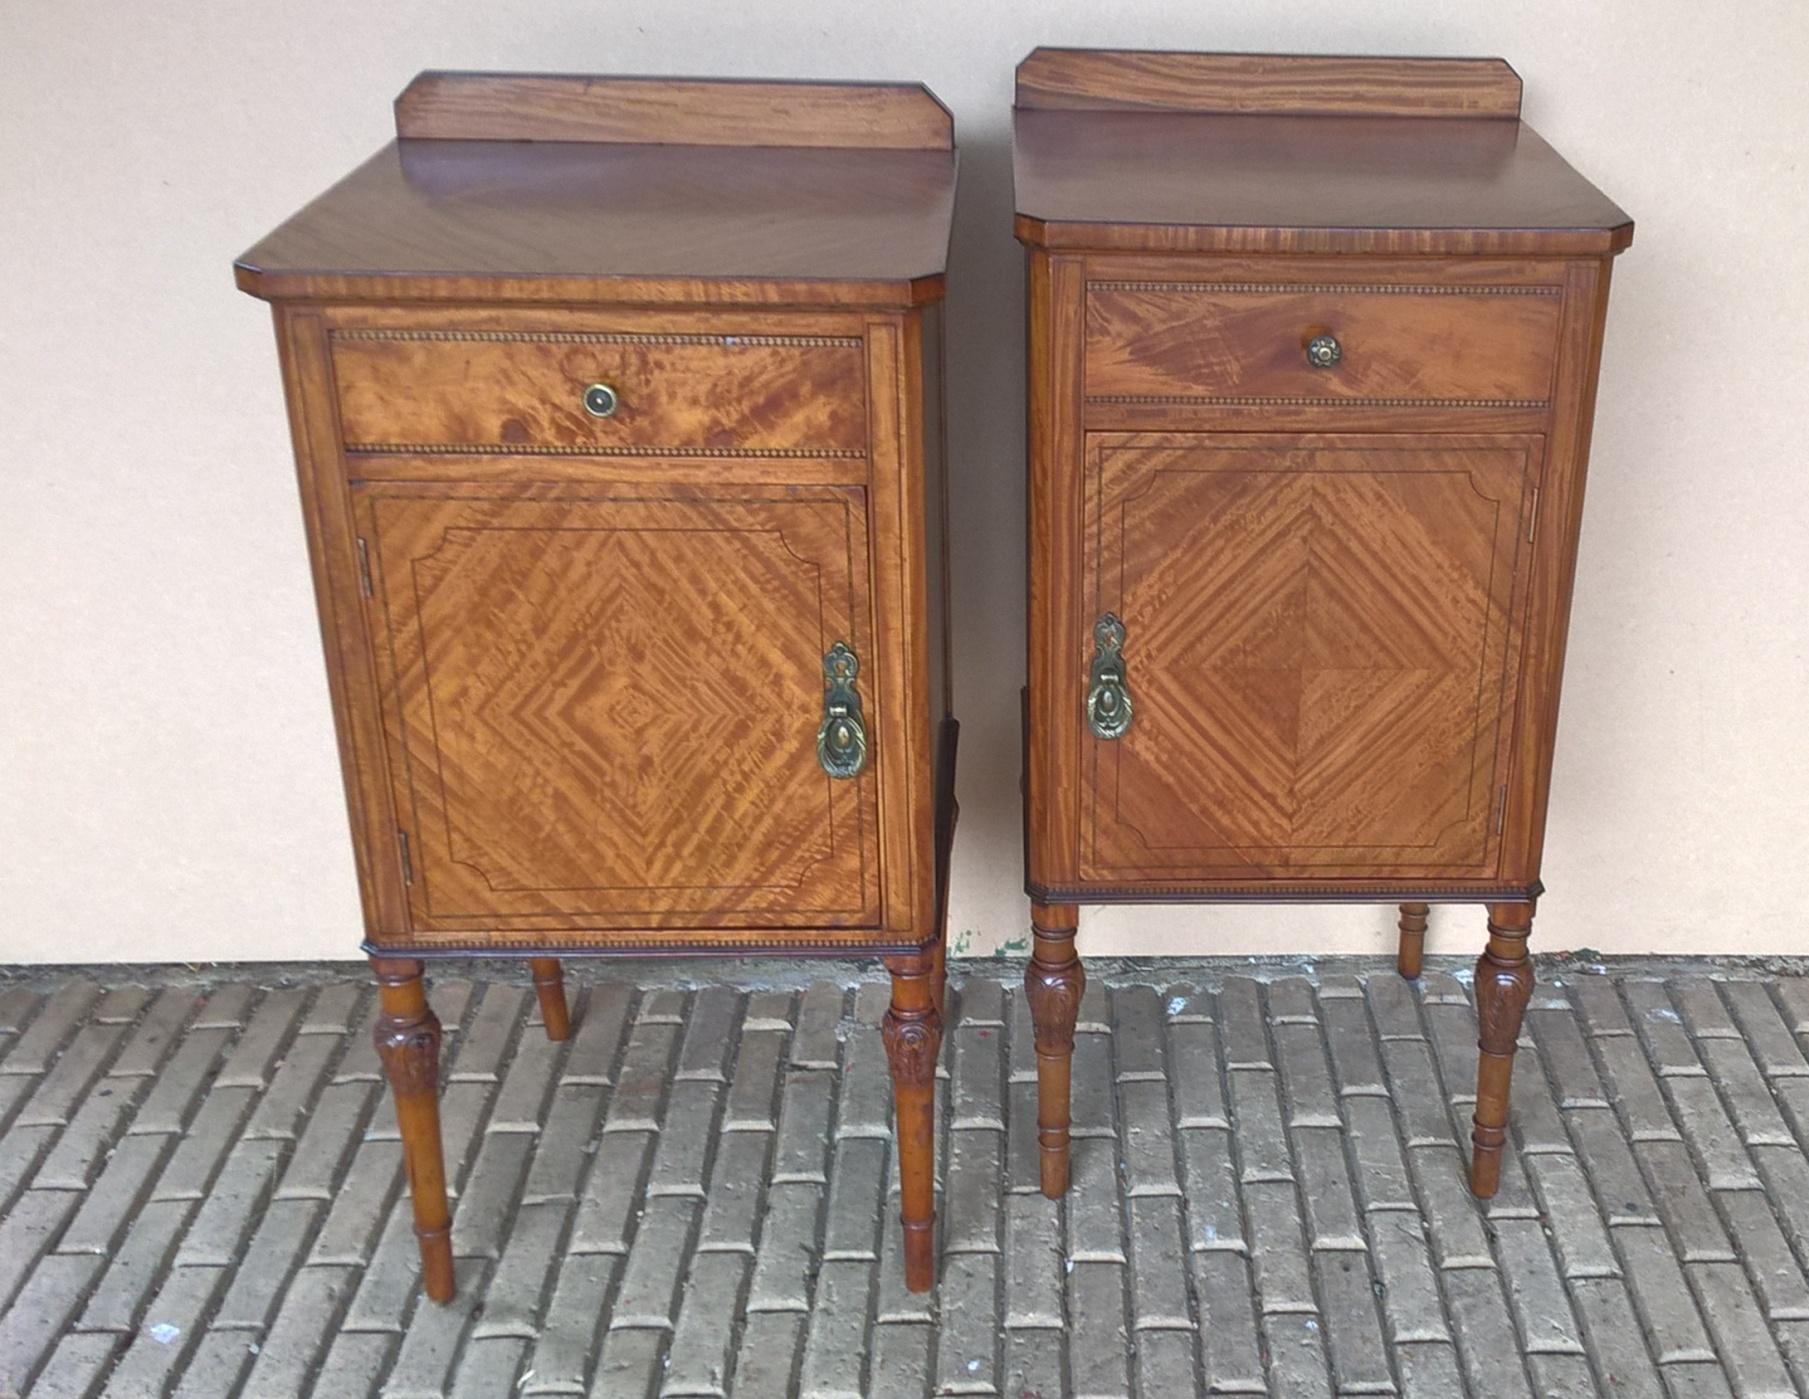 A near matched right and left opening Edwardian satinwood bedside cabinets.
Each with an upstand to the back, a quarter veneered top and a mahogany lined drawer below.
The quarter veneered doors open to reveal an interior with a single shelf.
The